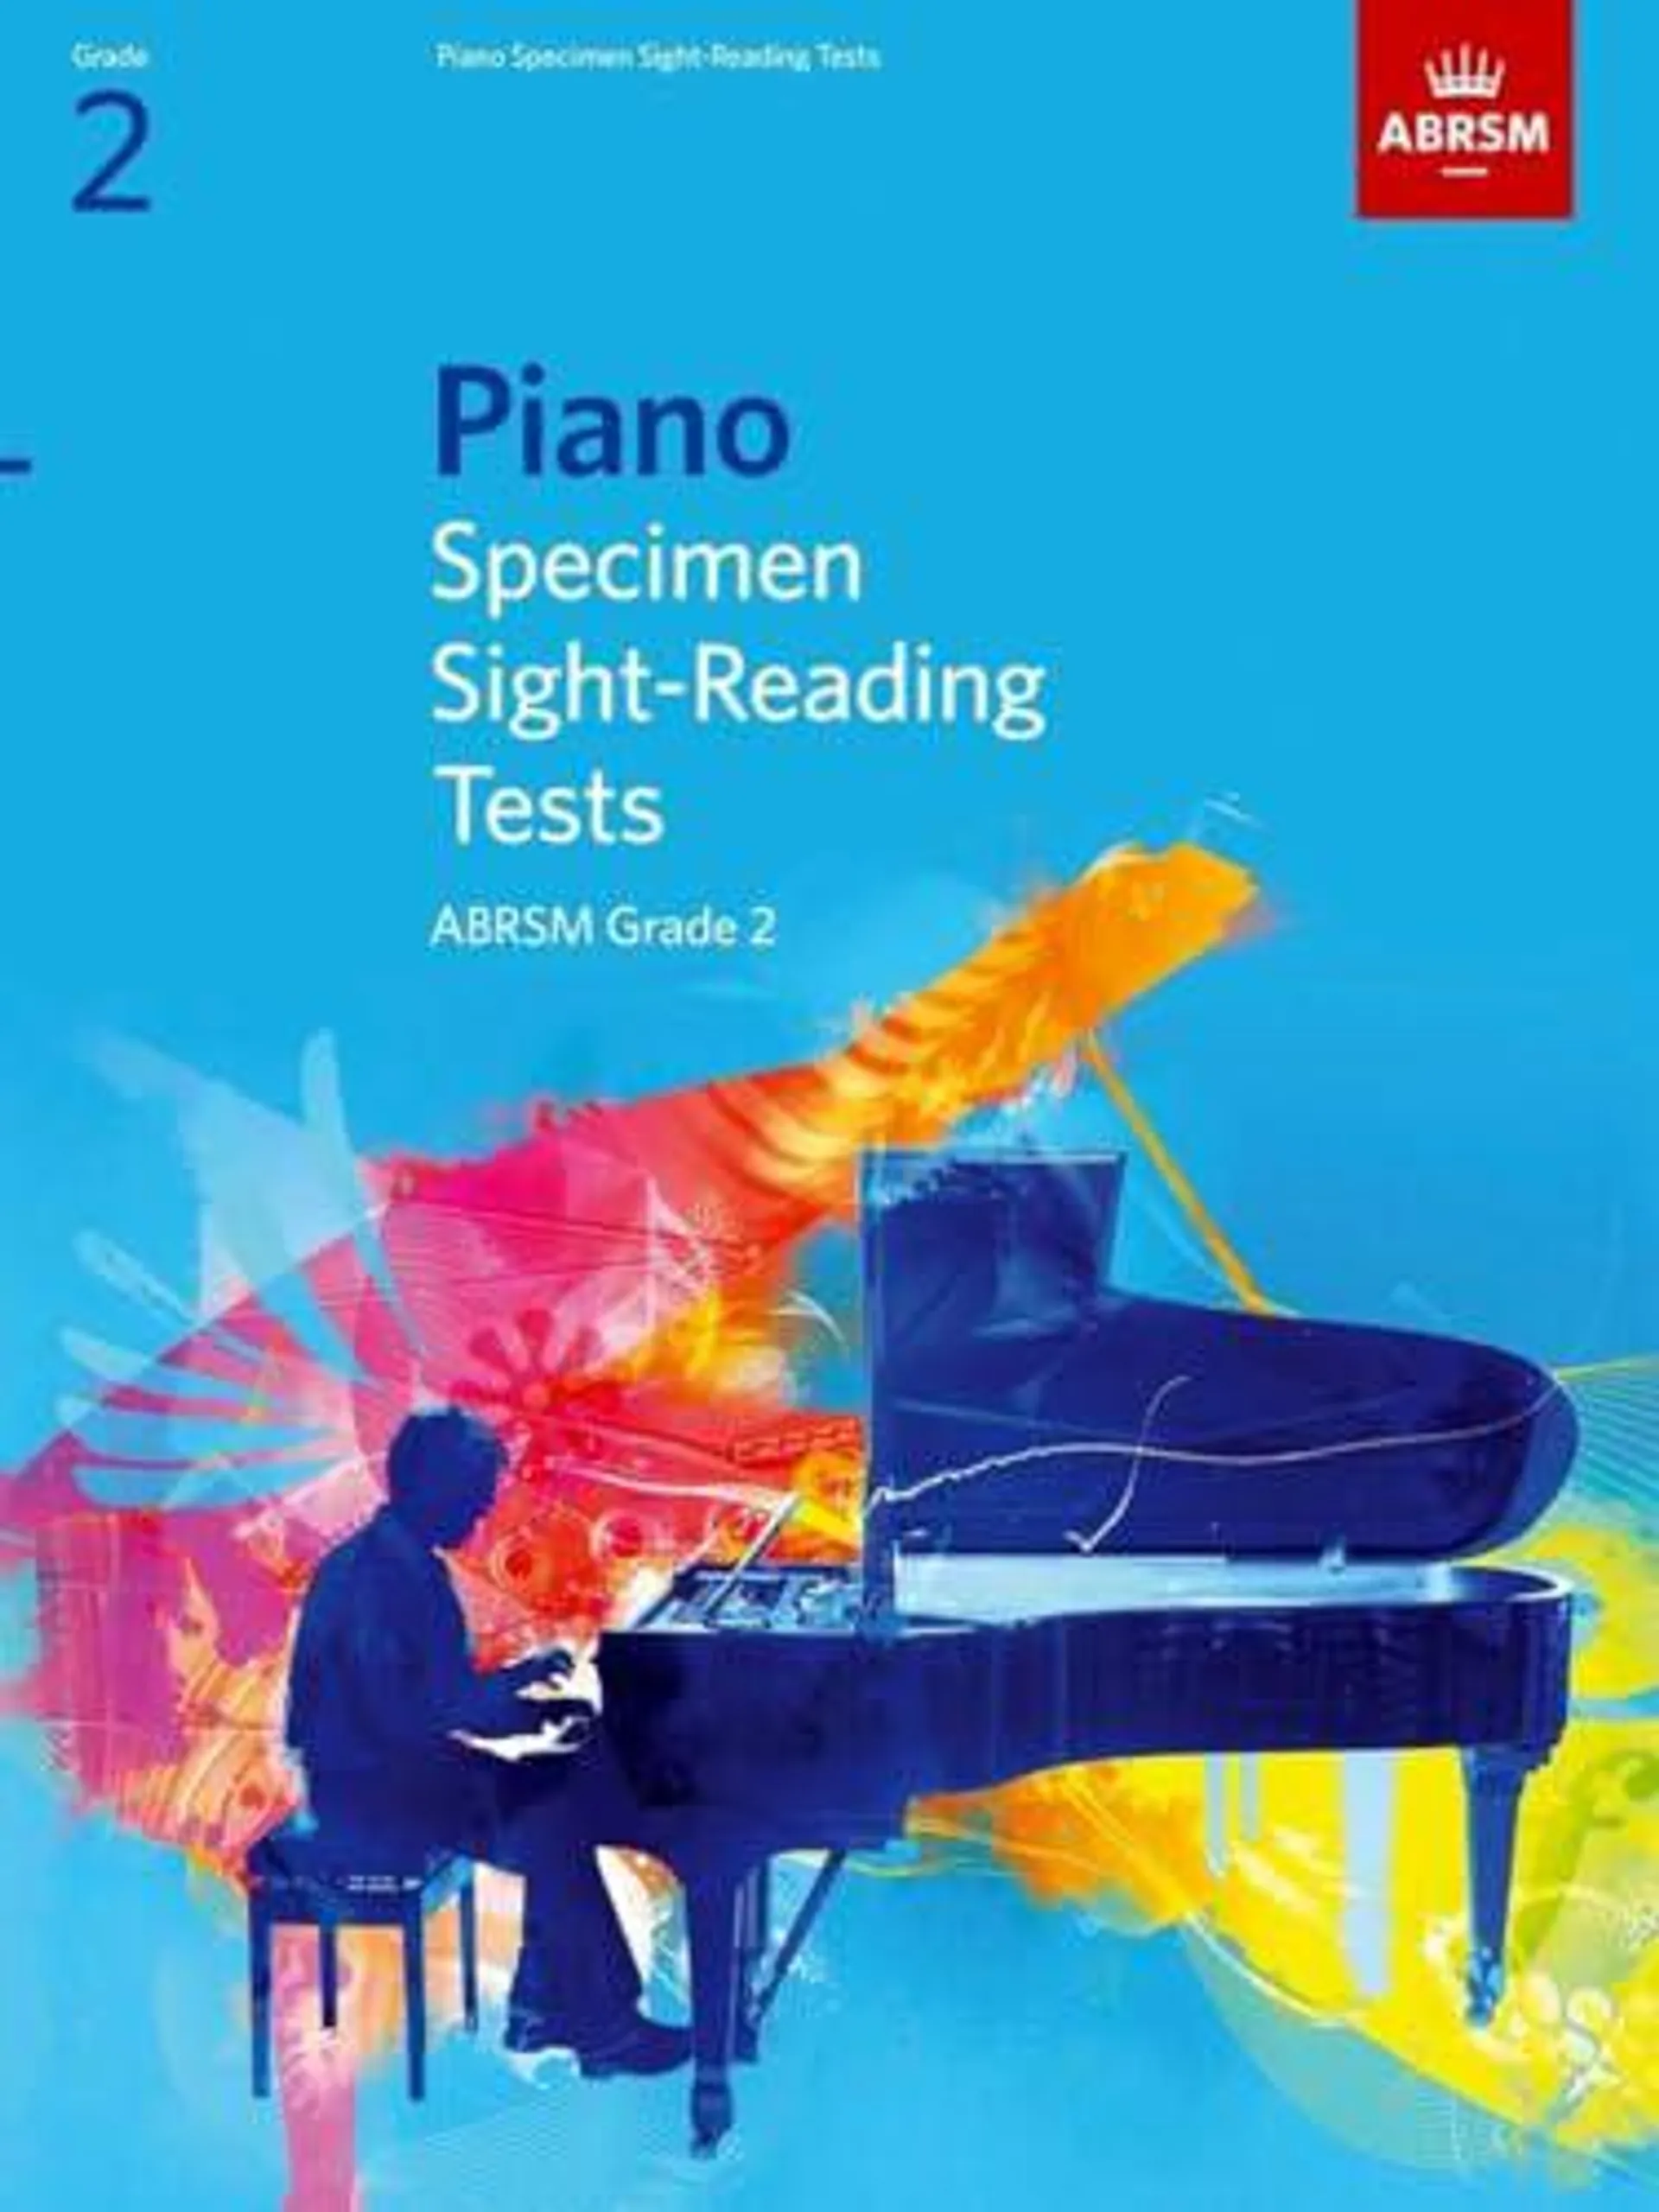 Piano Specimen Sight-Reading Tests, Grade 2 by ABRSM